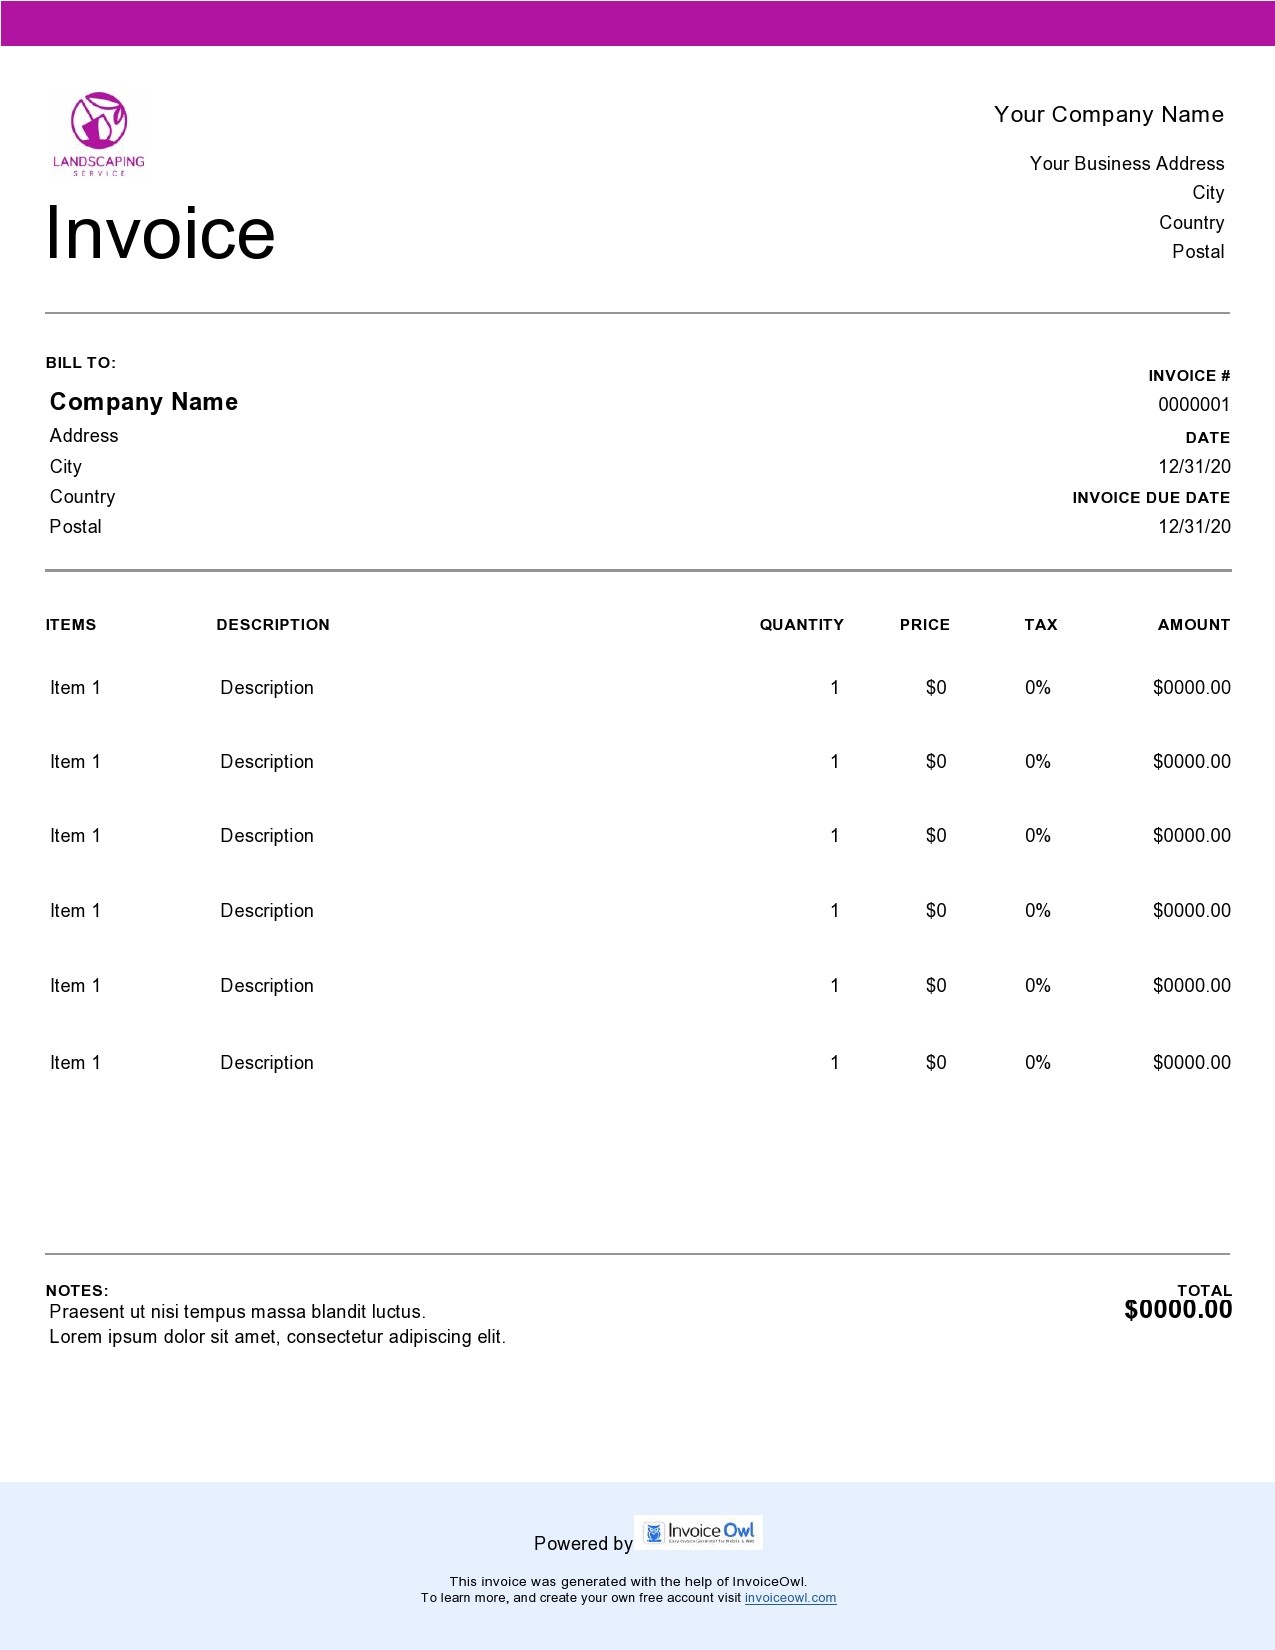 Free landscaping invoice 03